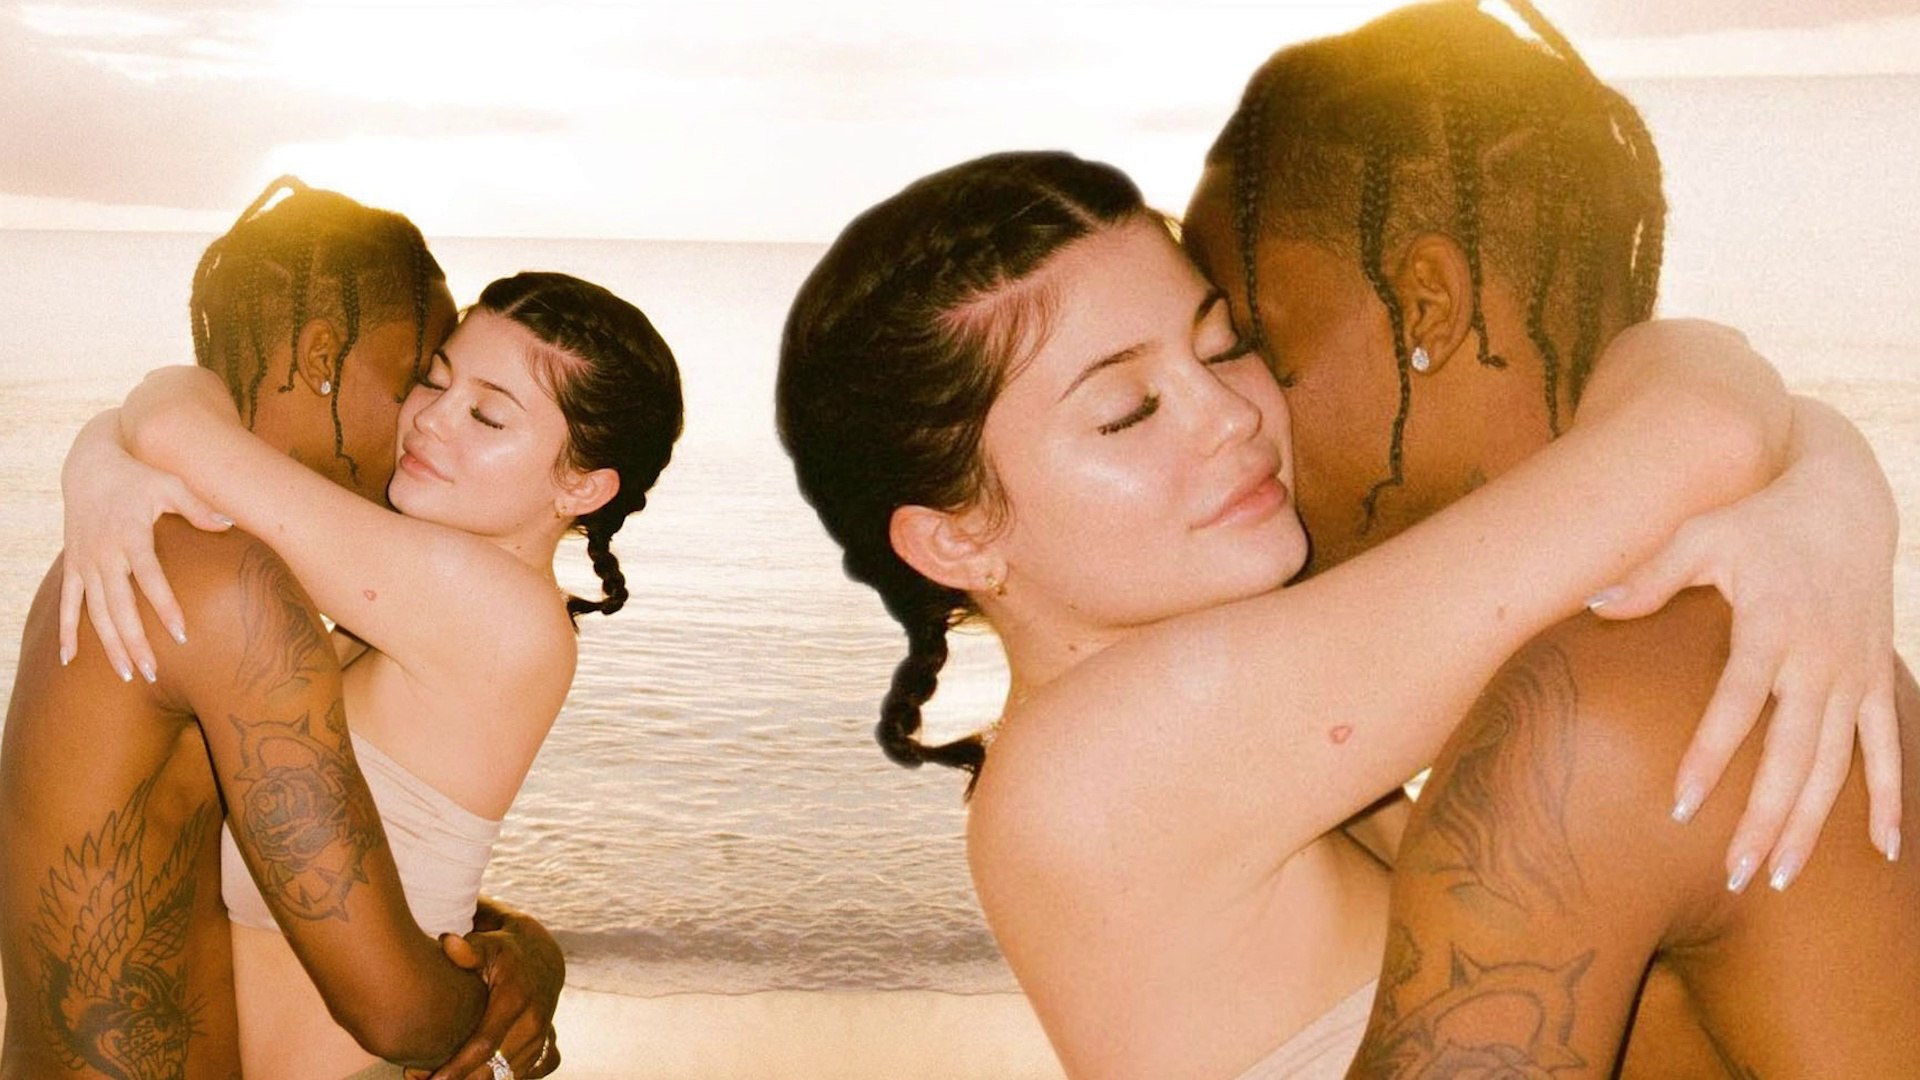 Kylie Jenner is in a state of bliss as baby daddy Travis Scott embraces her in rare couples photo.